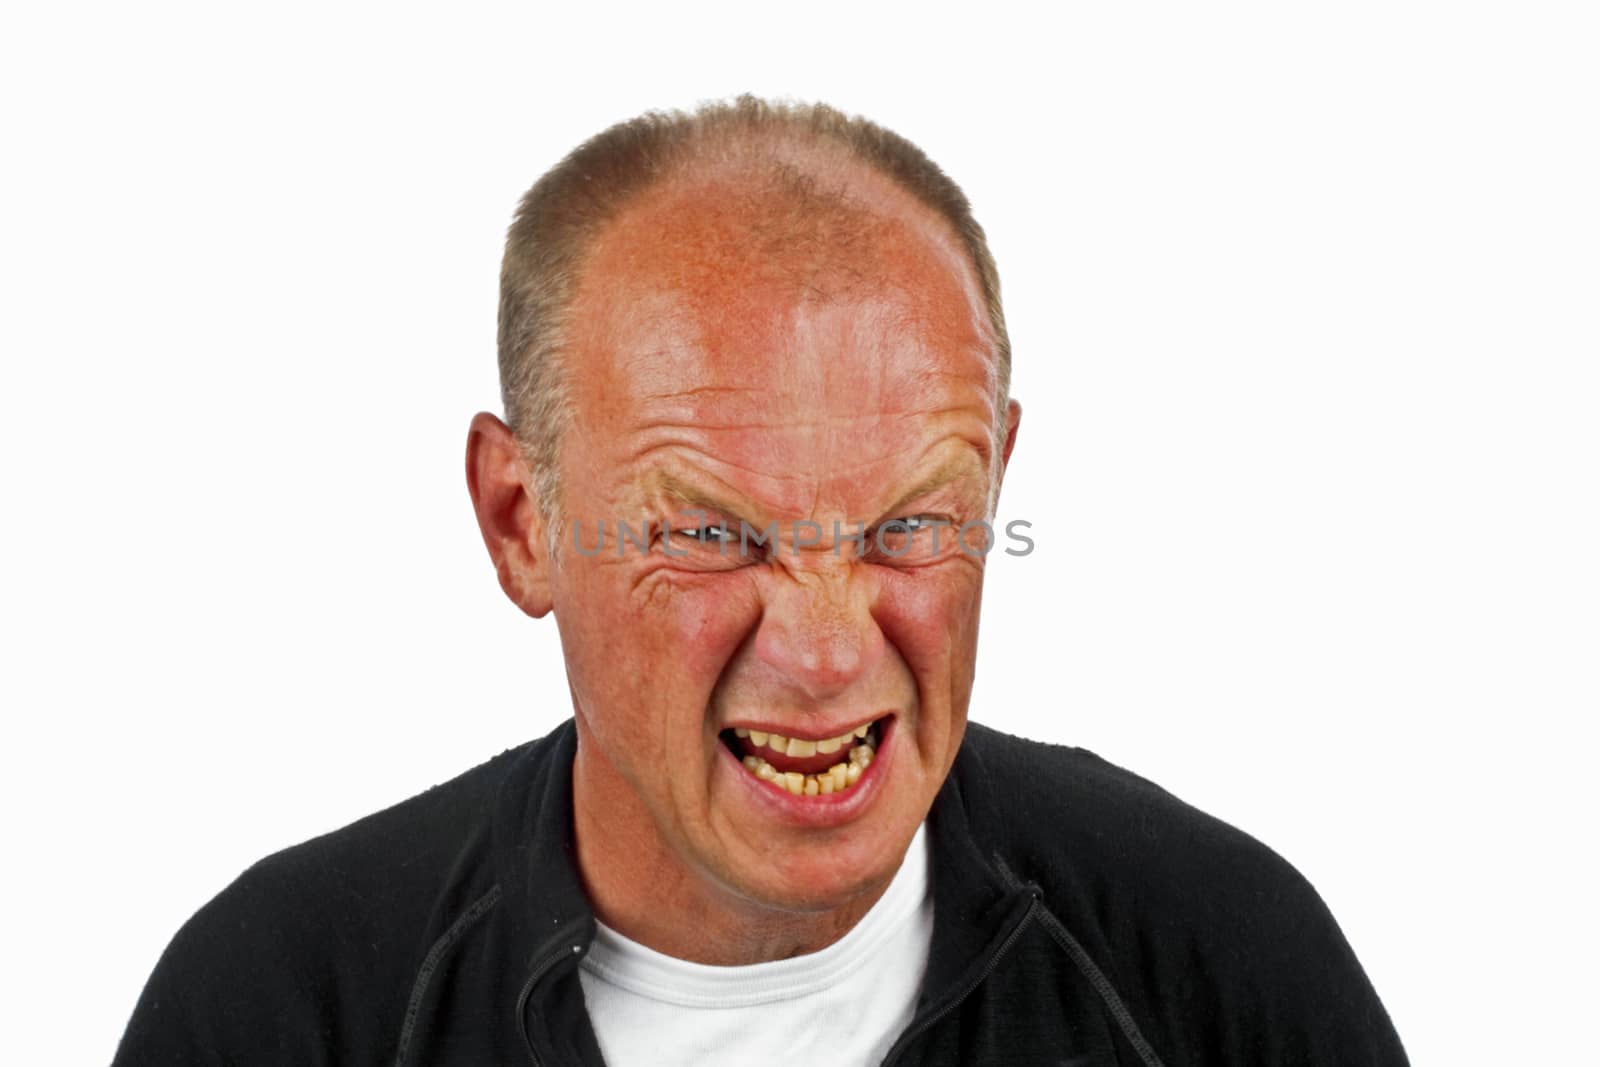 Man with angry facial expression